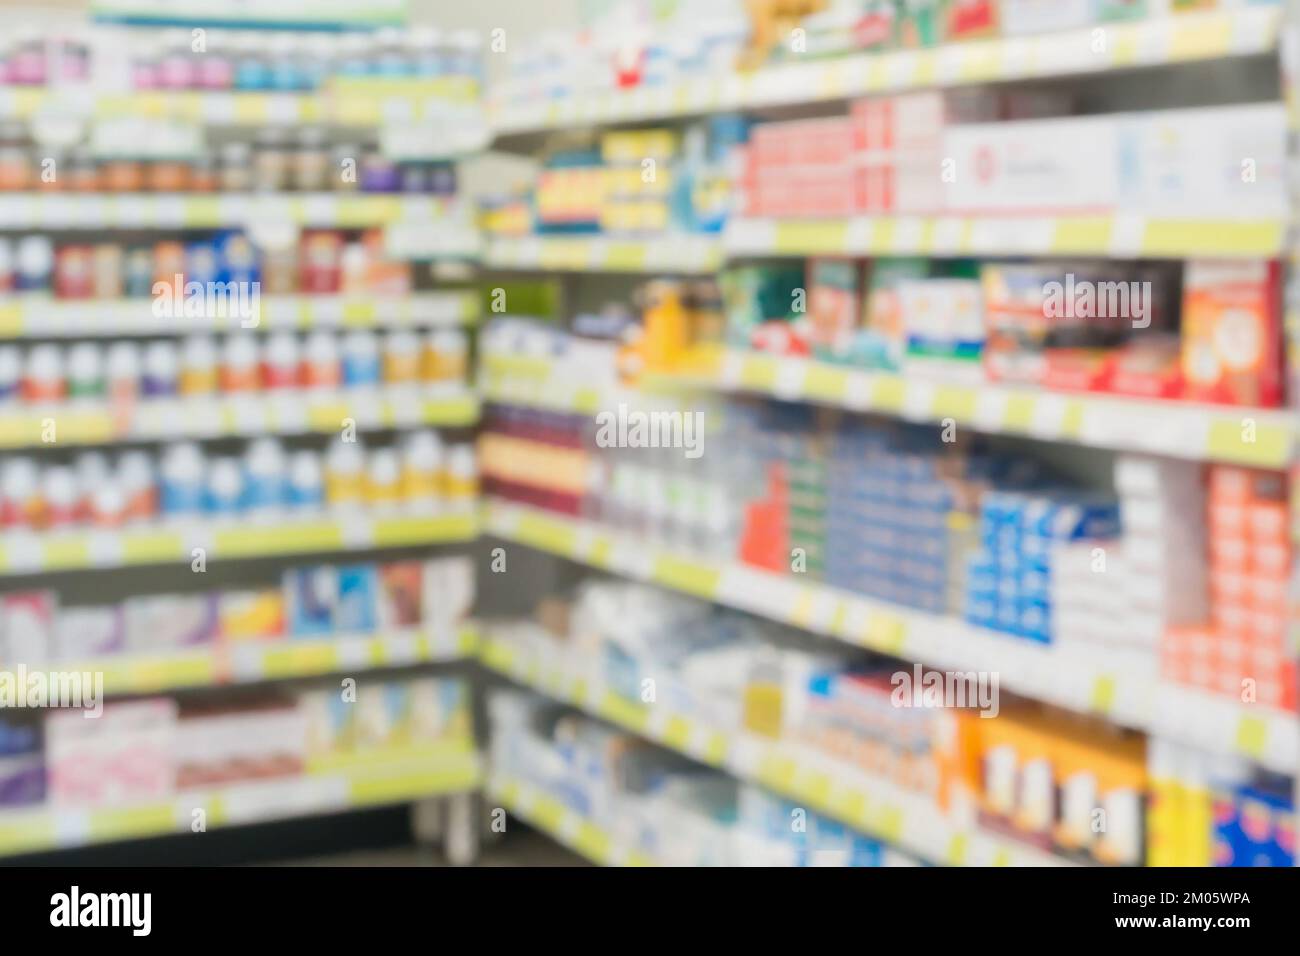 Pharmacy shelf display of over the counter medications Stock Photo - Alamy